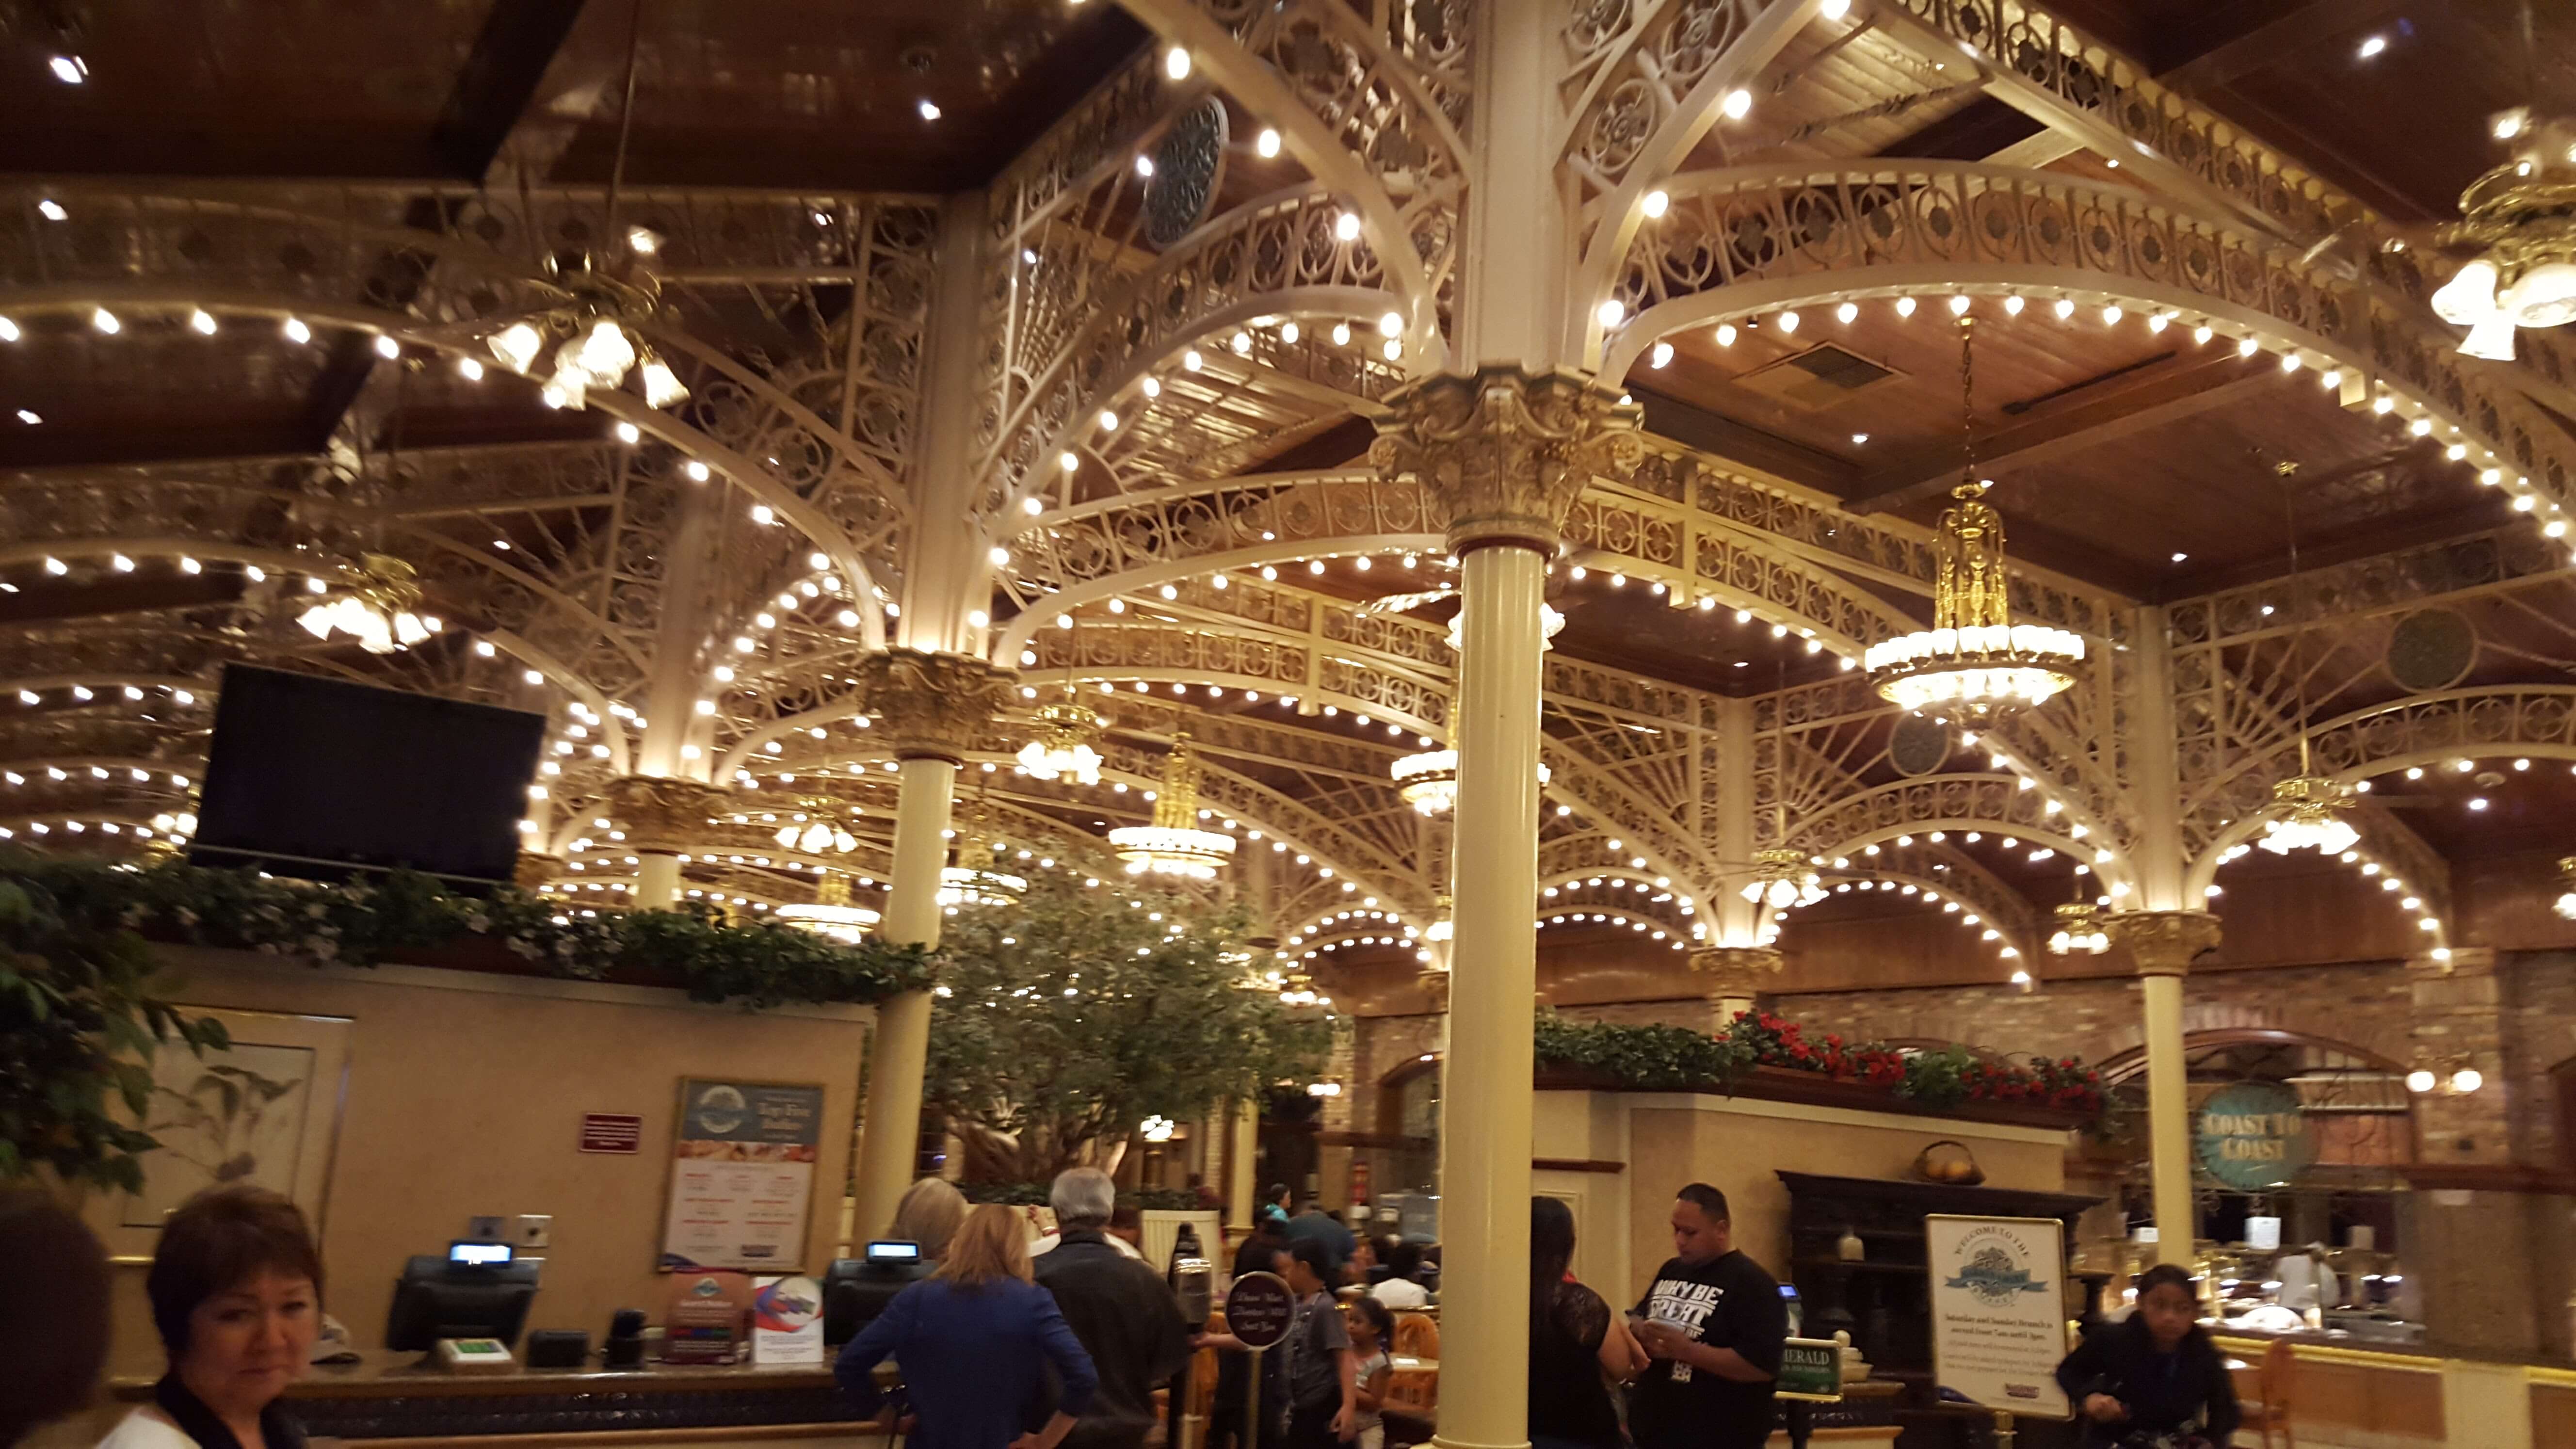 An image of Main Street Station Casino Garden Court Buffet, one of the cheapest buffets in Las Vegas